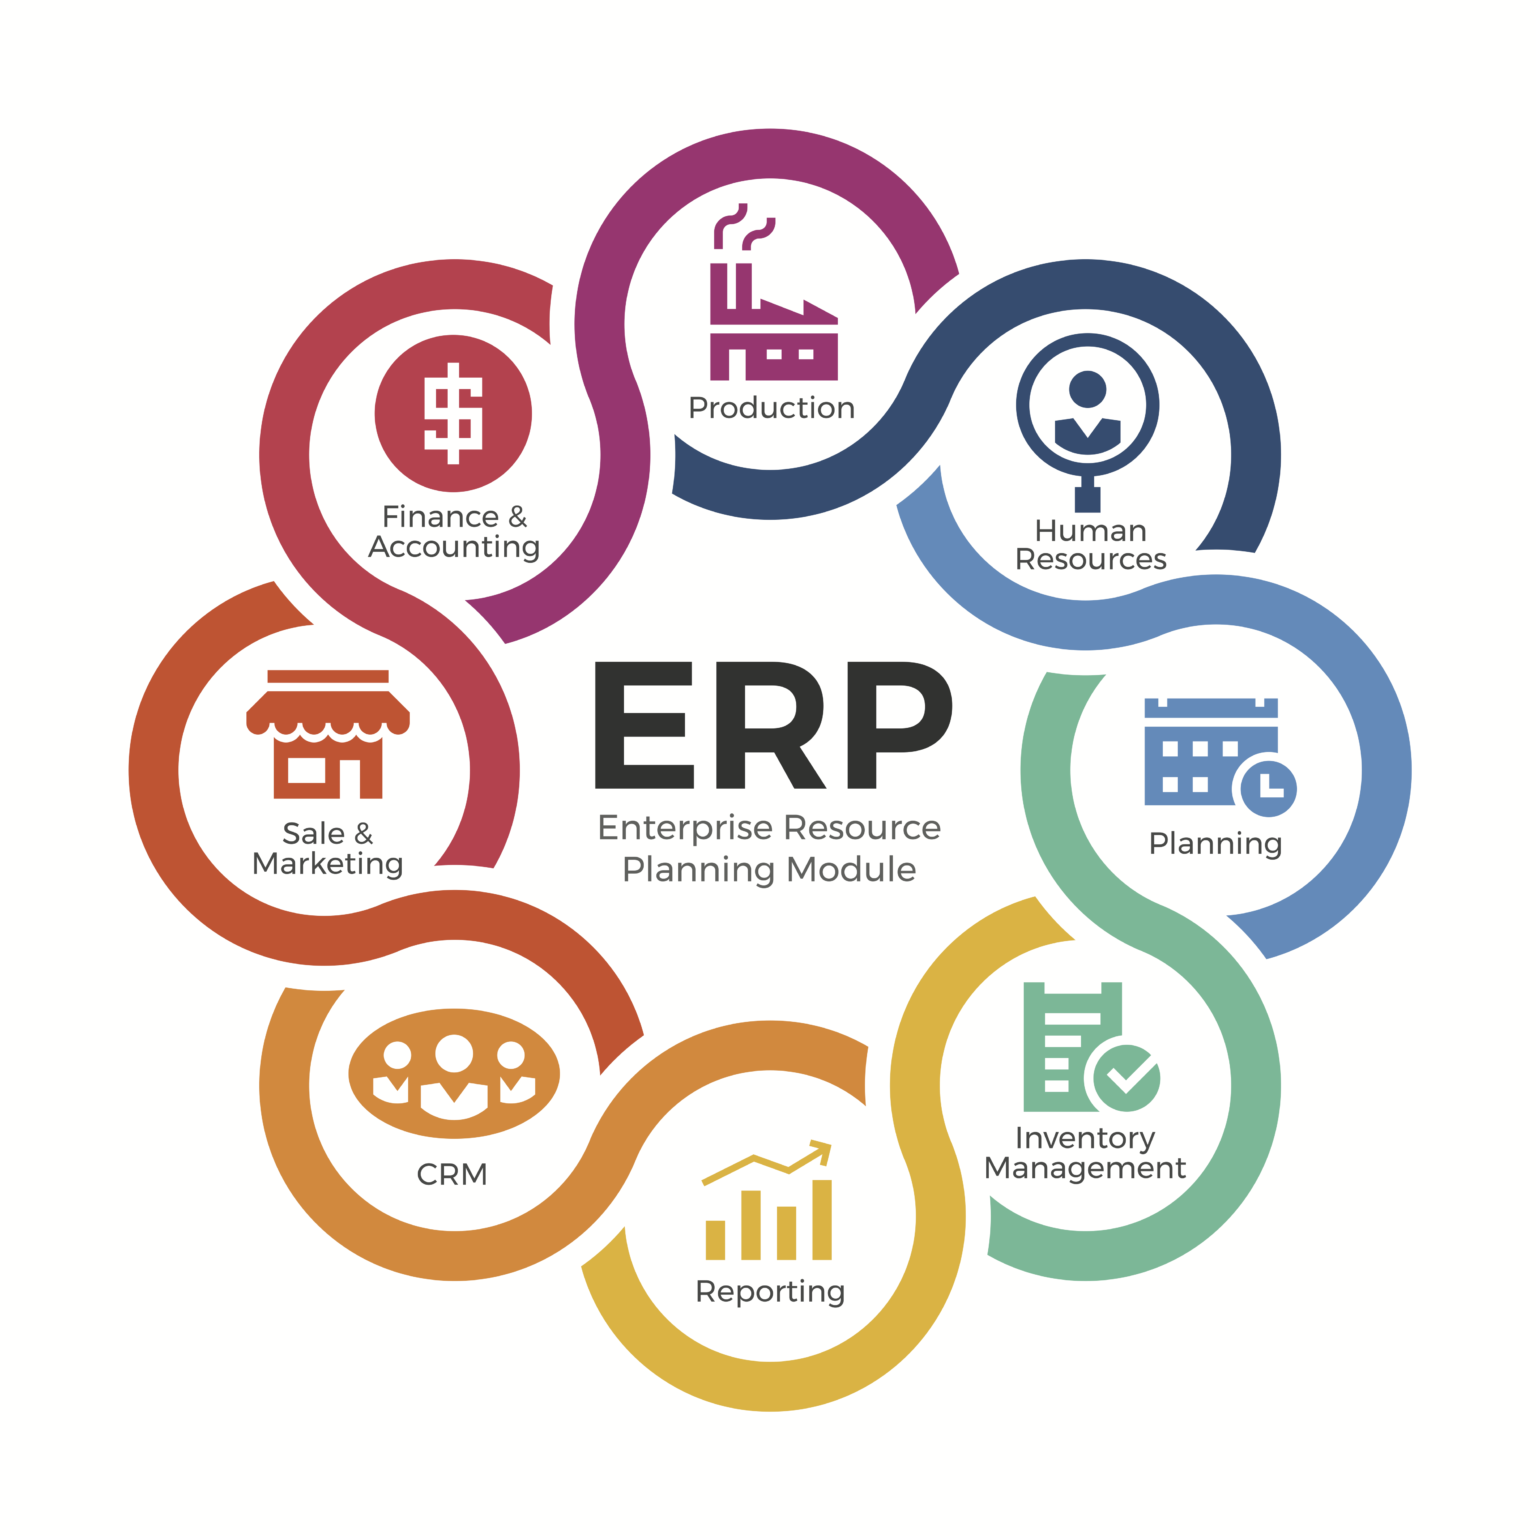 What is an ERP System and why does a company need it?